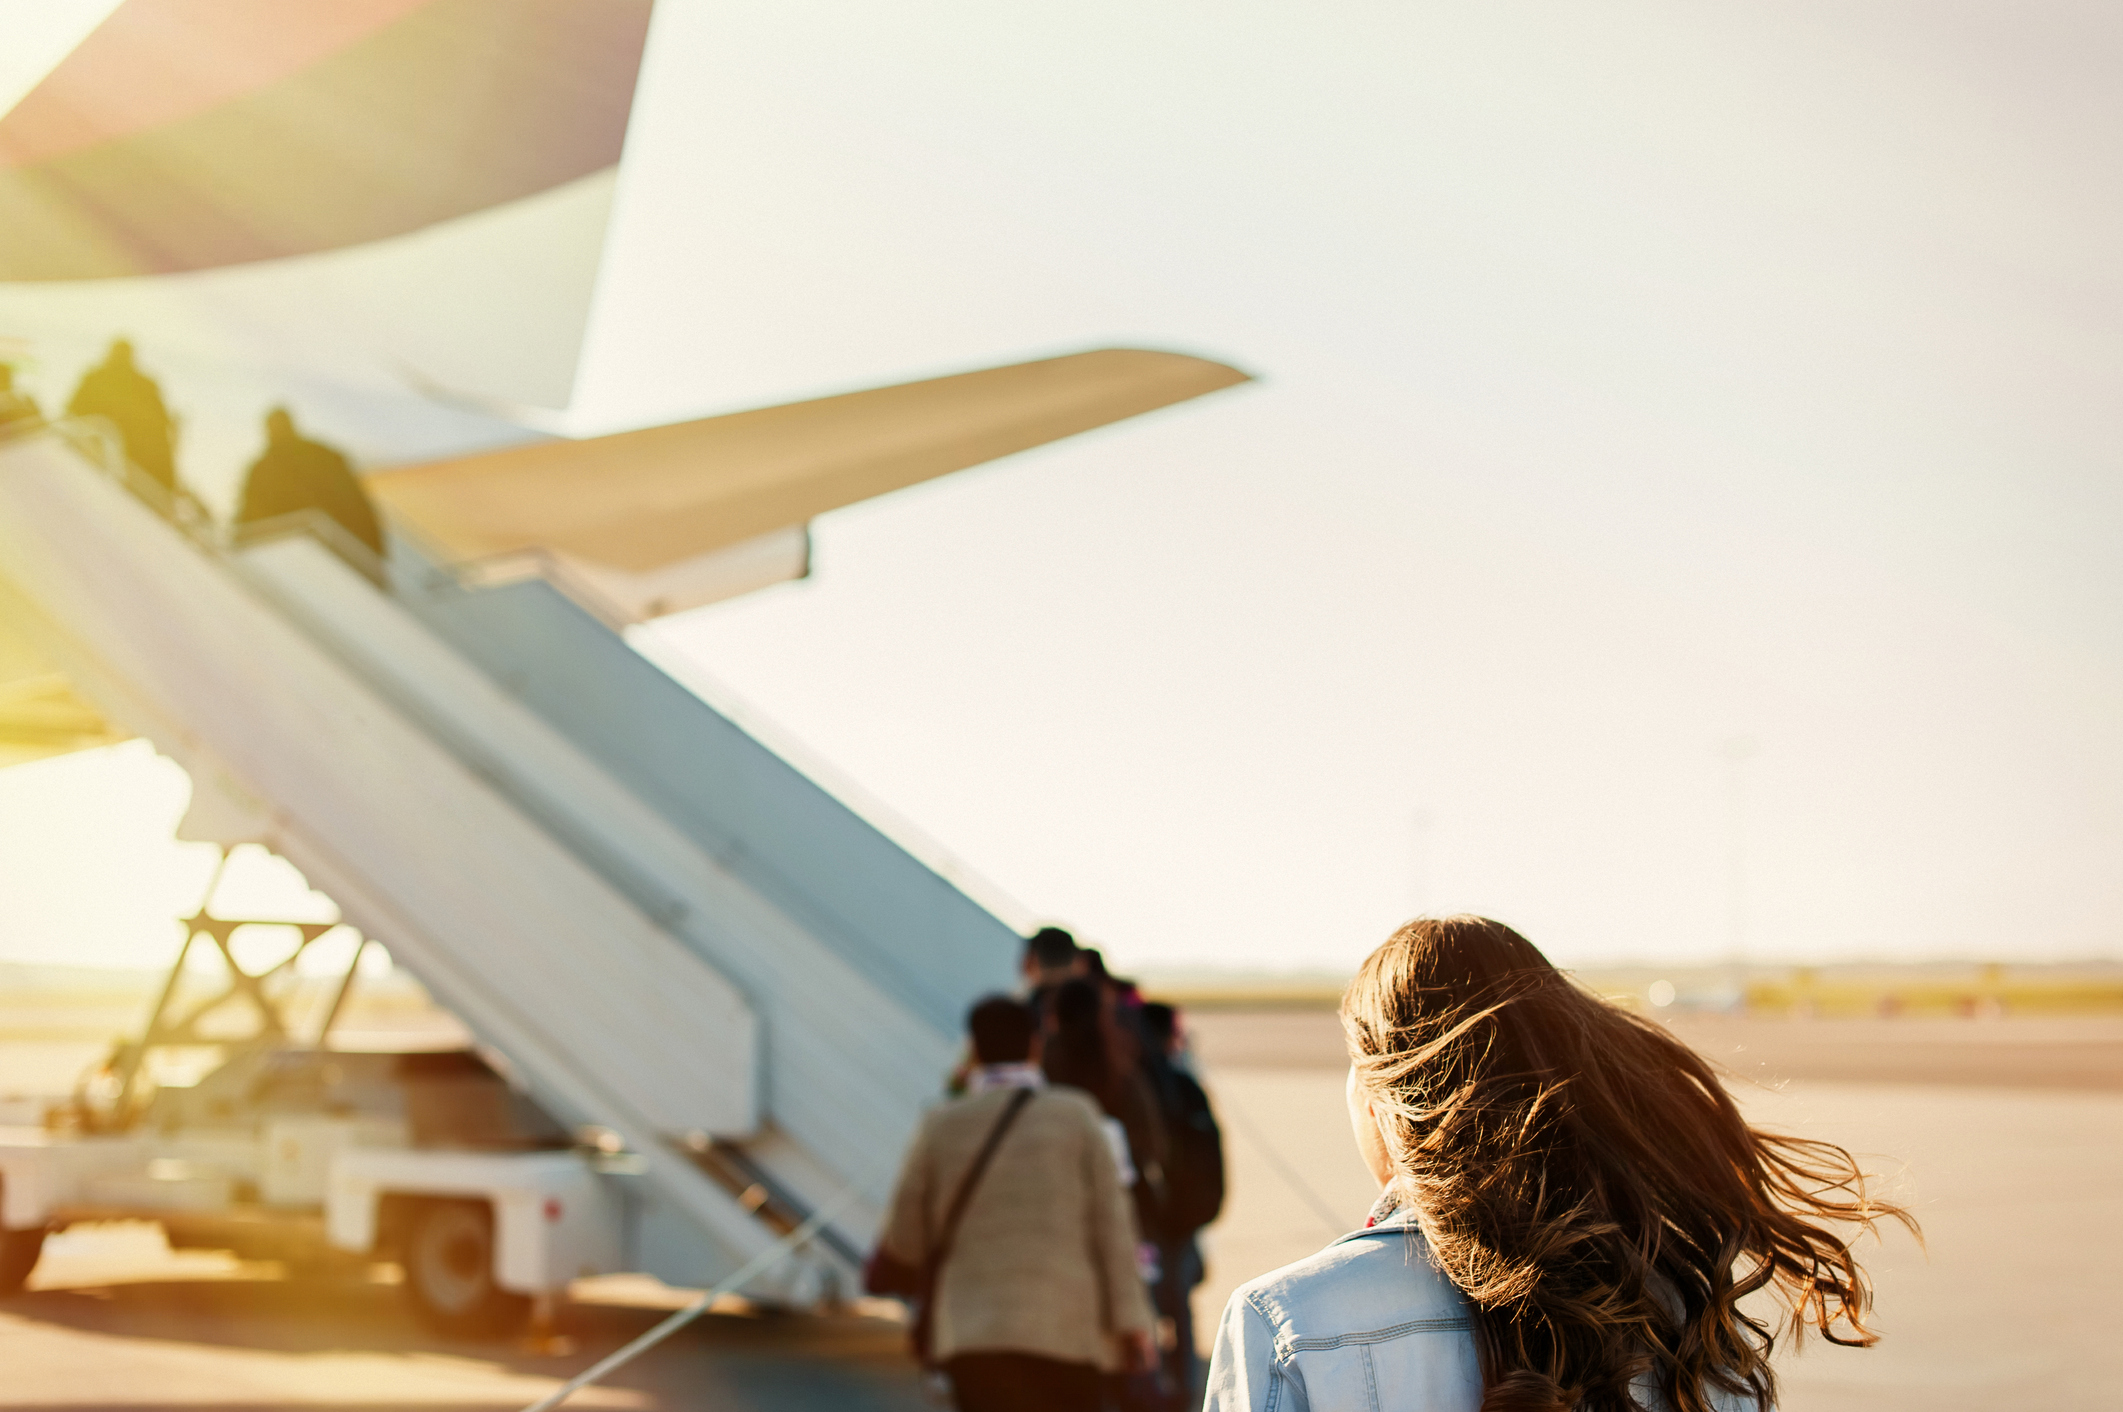 leisure-flight : young woman on tarmac boarding on a plane